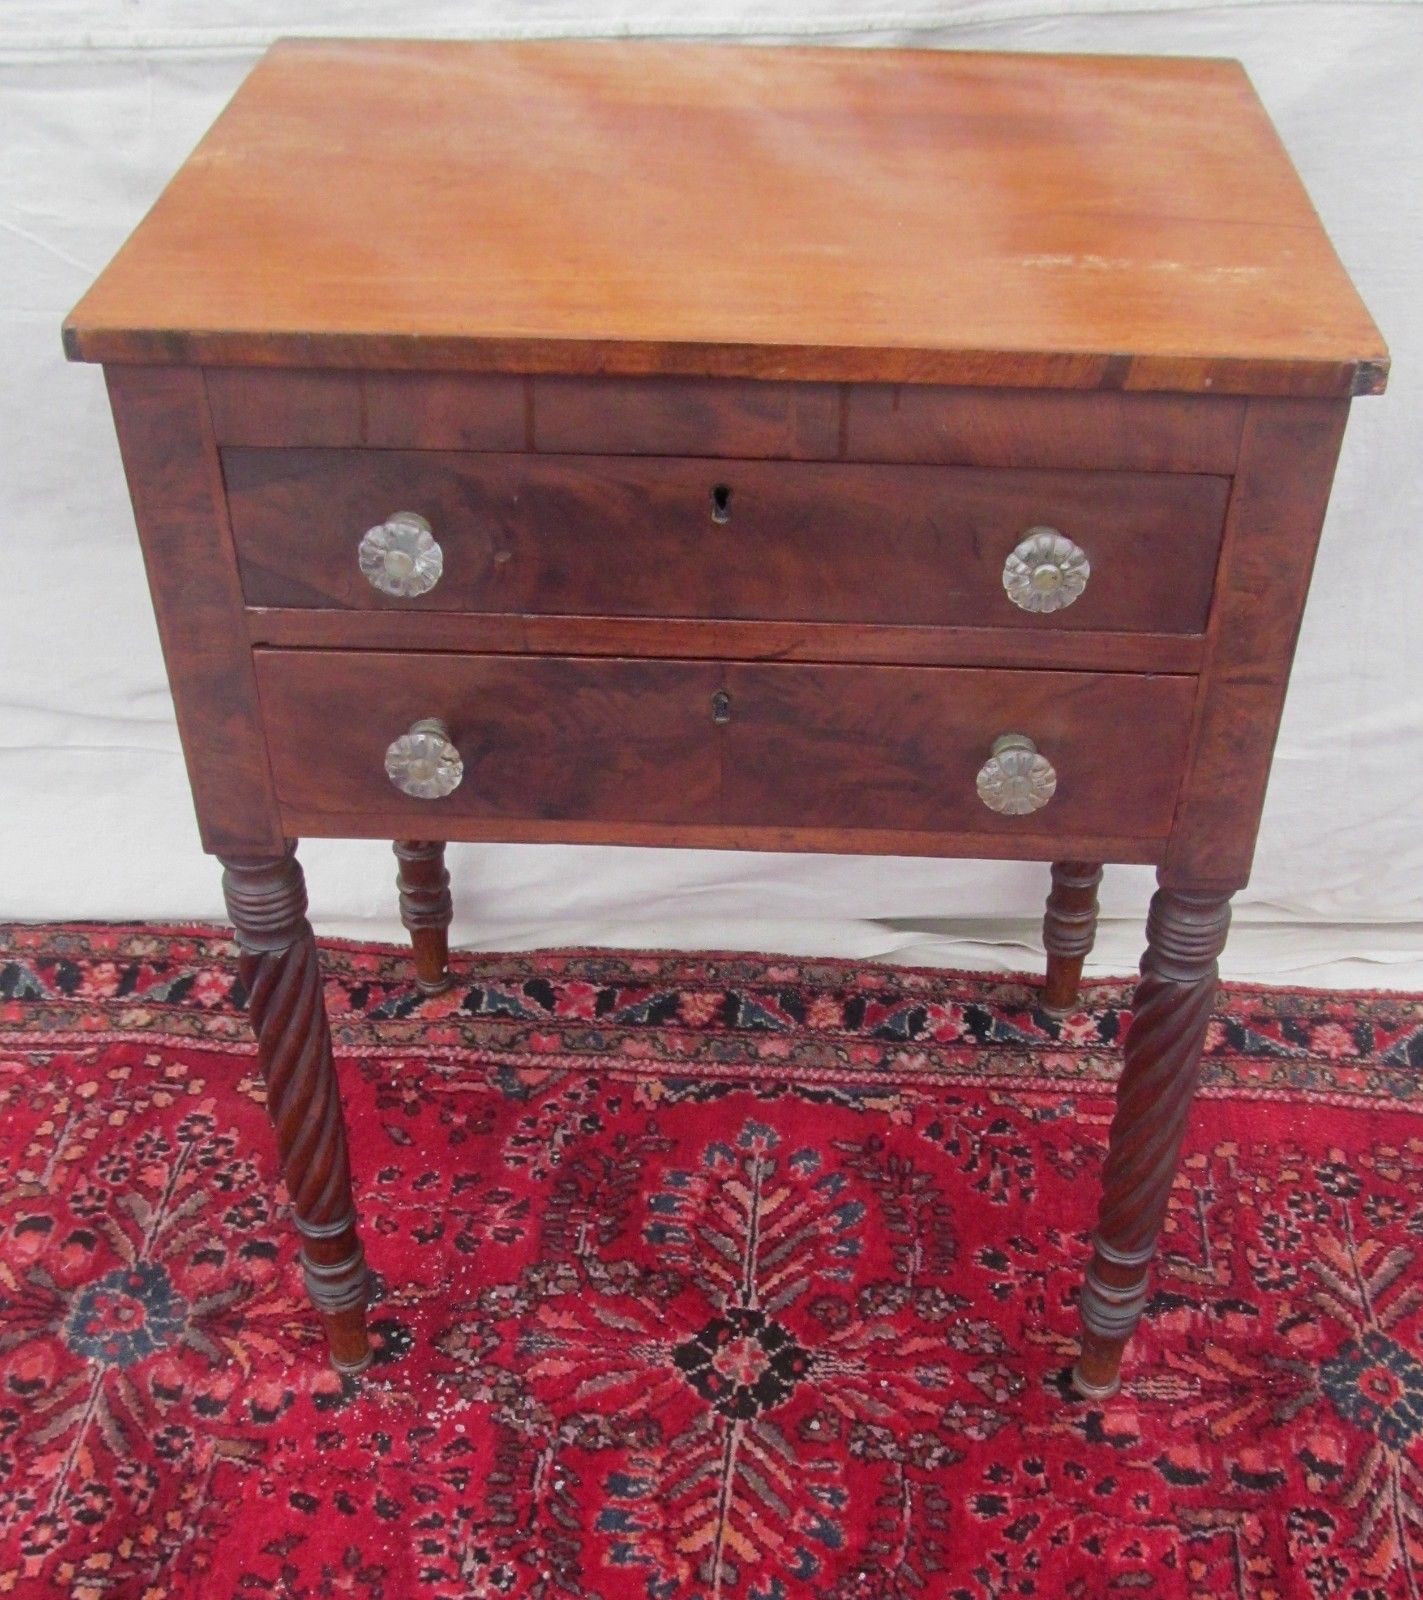 EXCELLENT FEDERAL PERIOD MAHOGANY WORK TABLE WITH SANDWICH GLASS PULLS